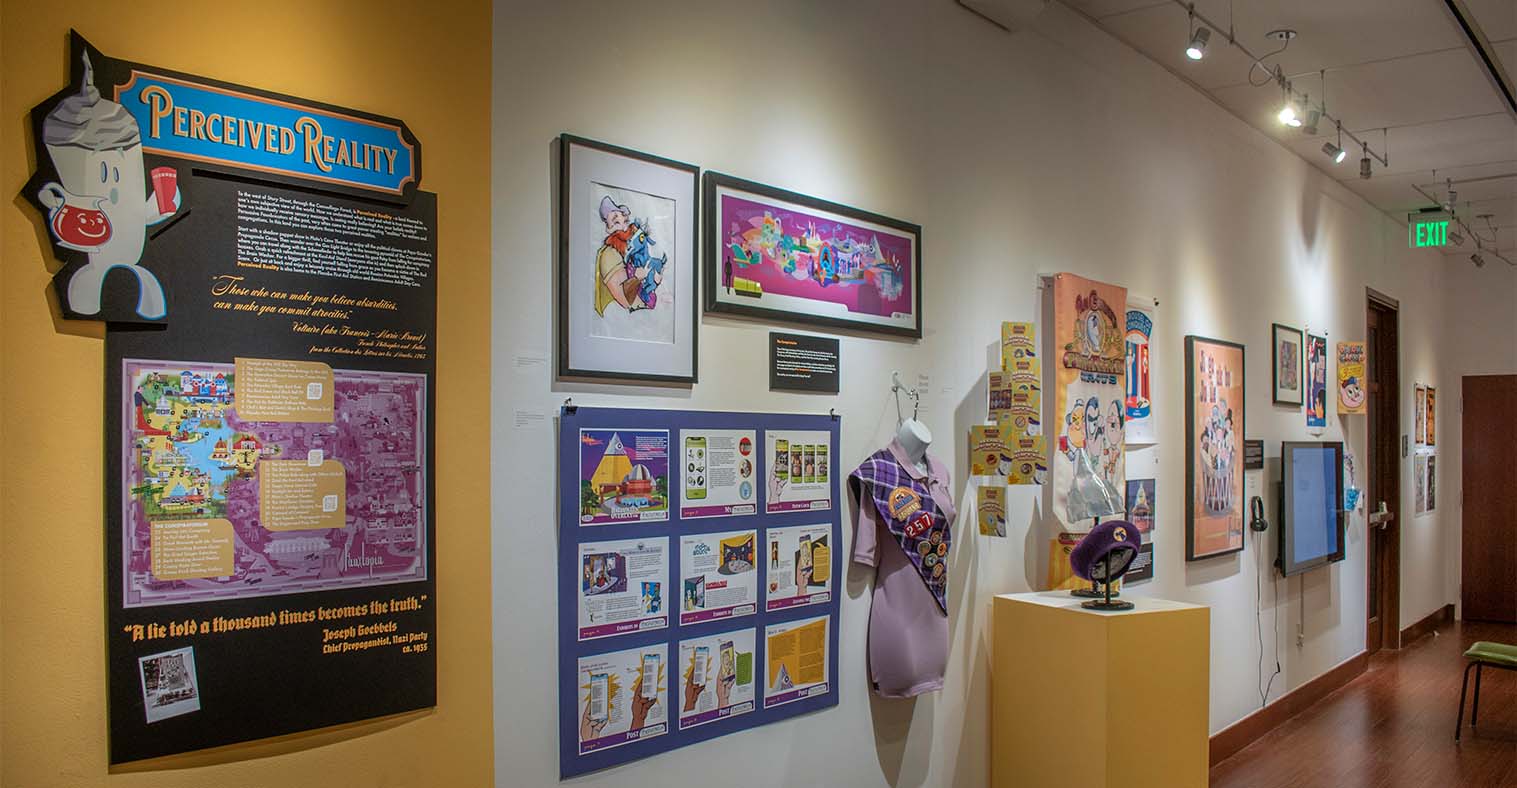 Installation View, West Gallery, Treasures of Fauxtopia Artifacts, Memorabilia and Souvenirs from The Most Believable Place on Earth Exhibition, Mar. 17 to Sep. 11, 2022.